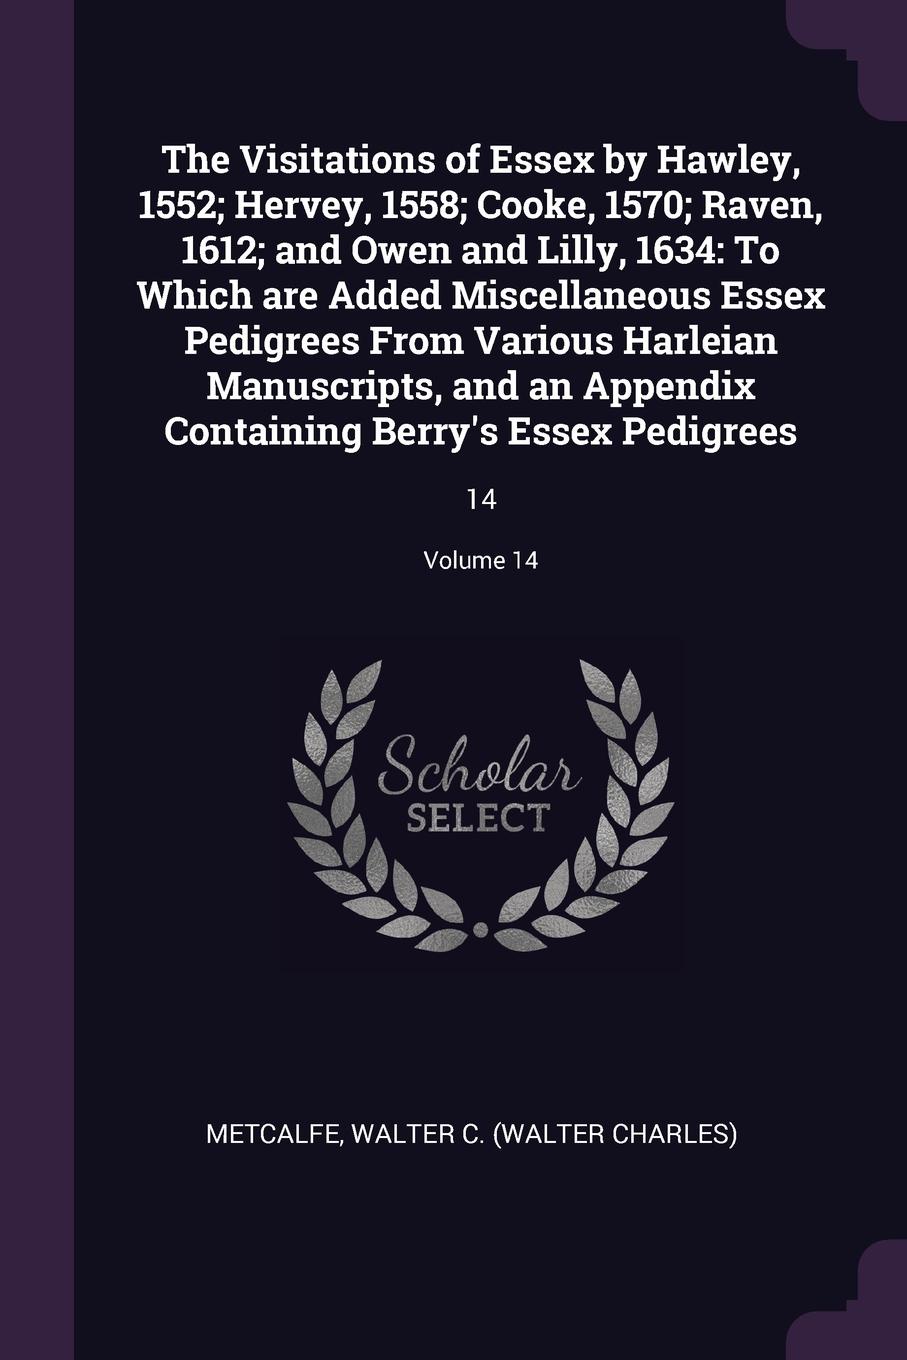 The Visitations of Essex by Hawley, 1552; Hervey, 1558; Cooke, 1570; Raven, 1612; and Owen and Lilly, 1634. To Which are Added Miscellaneous Essex Pedigrees From Various Harleian Manuscripts, and an Appendix Containing Berry`s Essex Pedigrees: 14;...